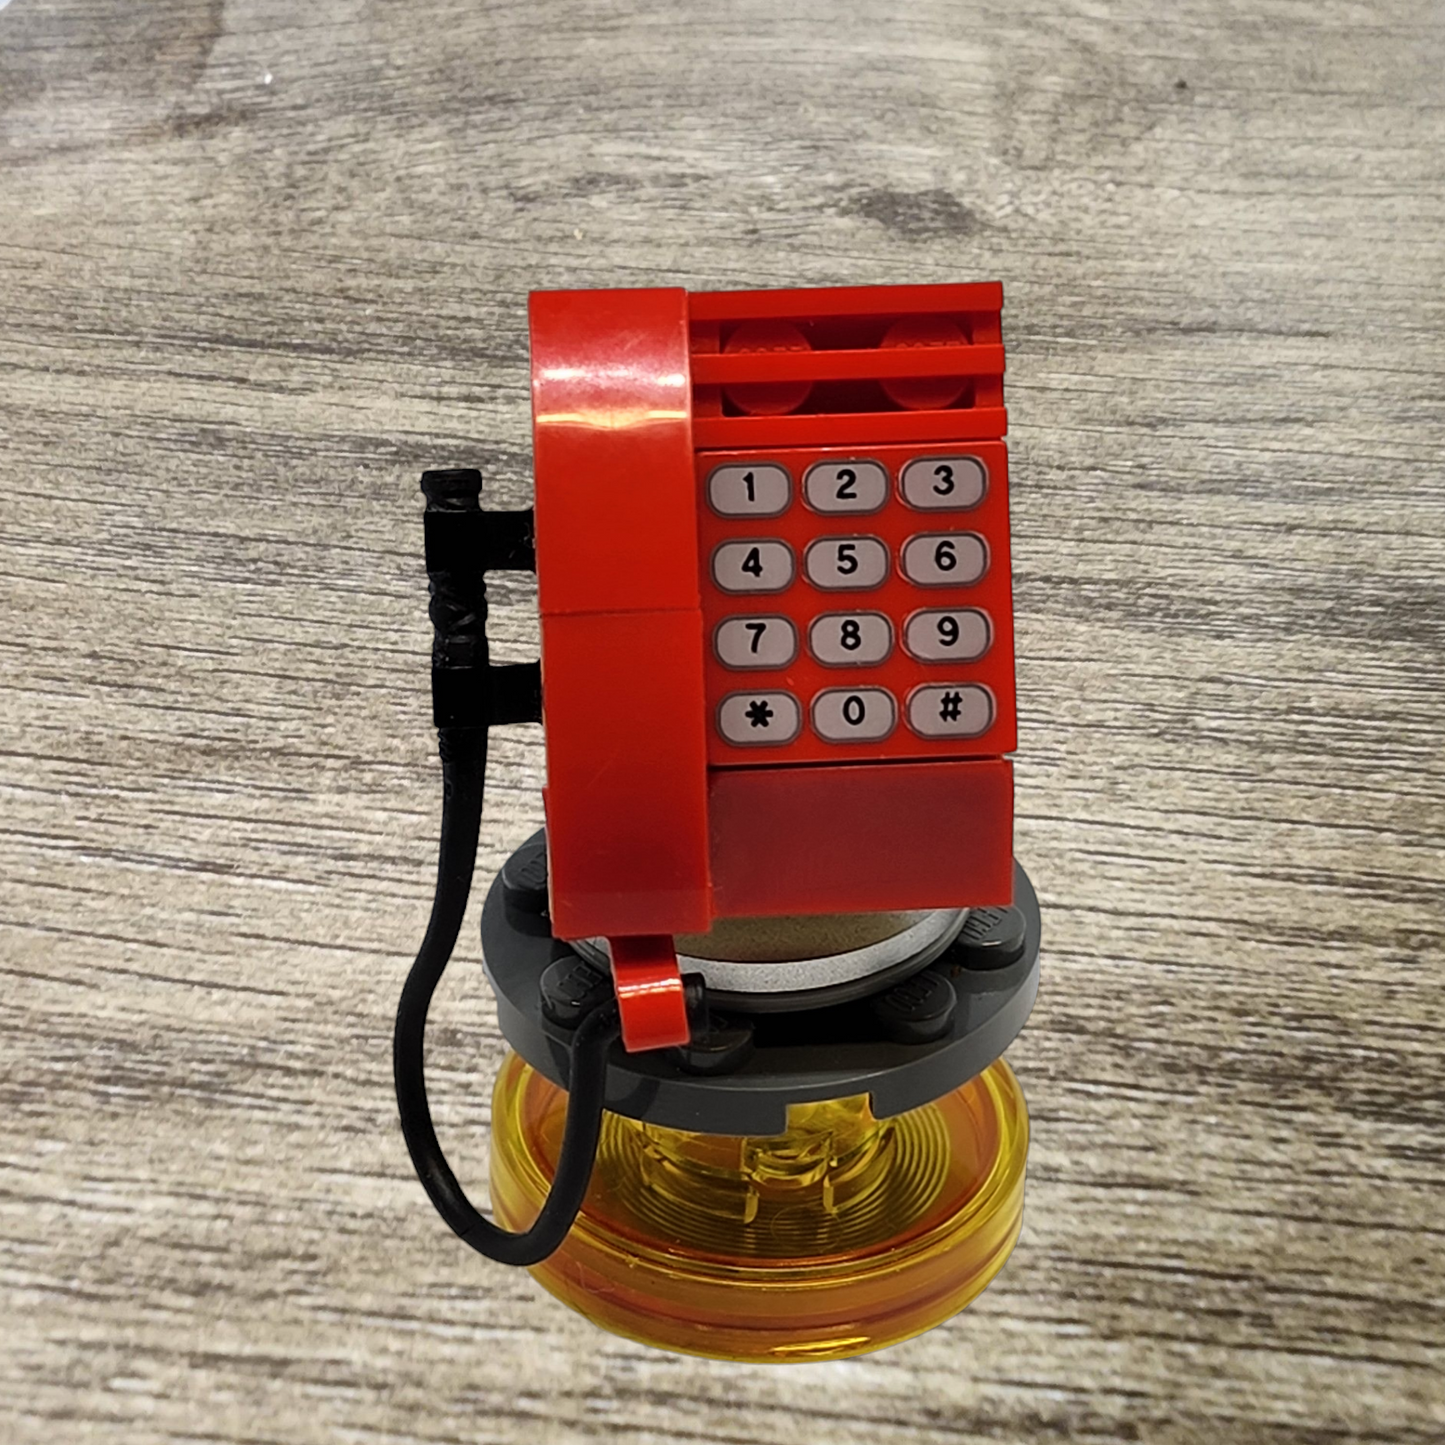 E.T.'s Phone Home Red Touch Phone 71258 Lego Dimensions